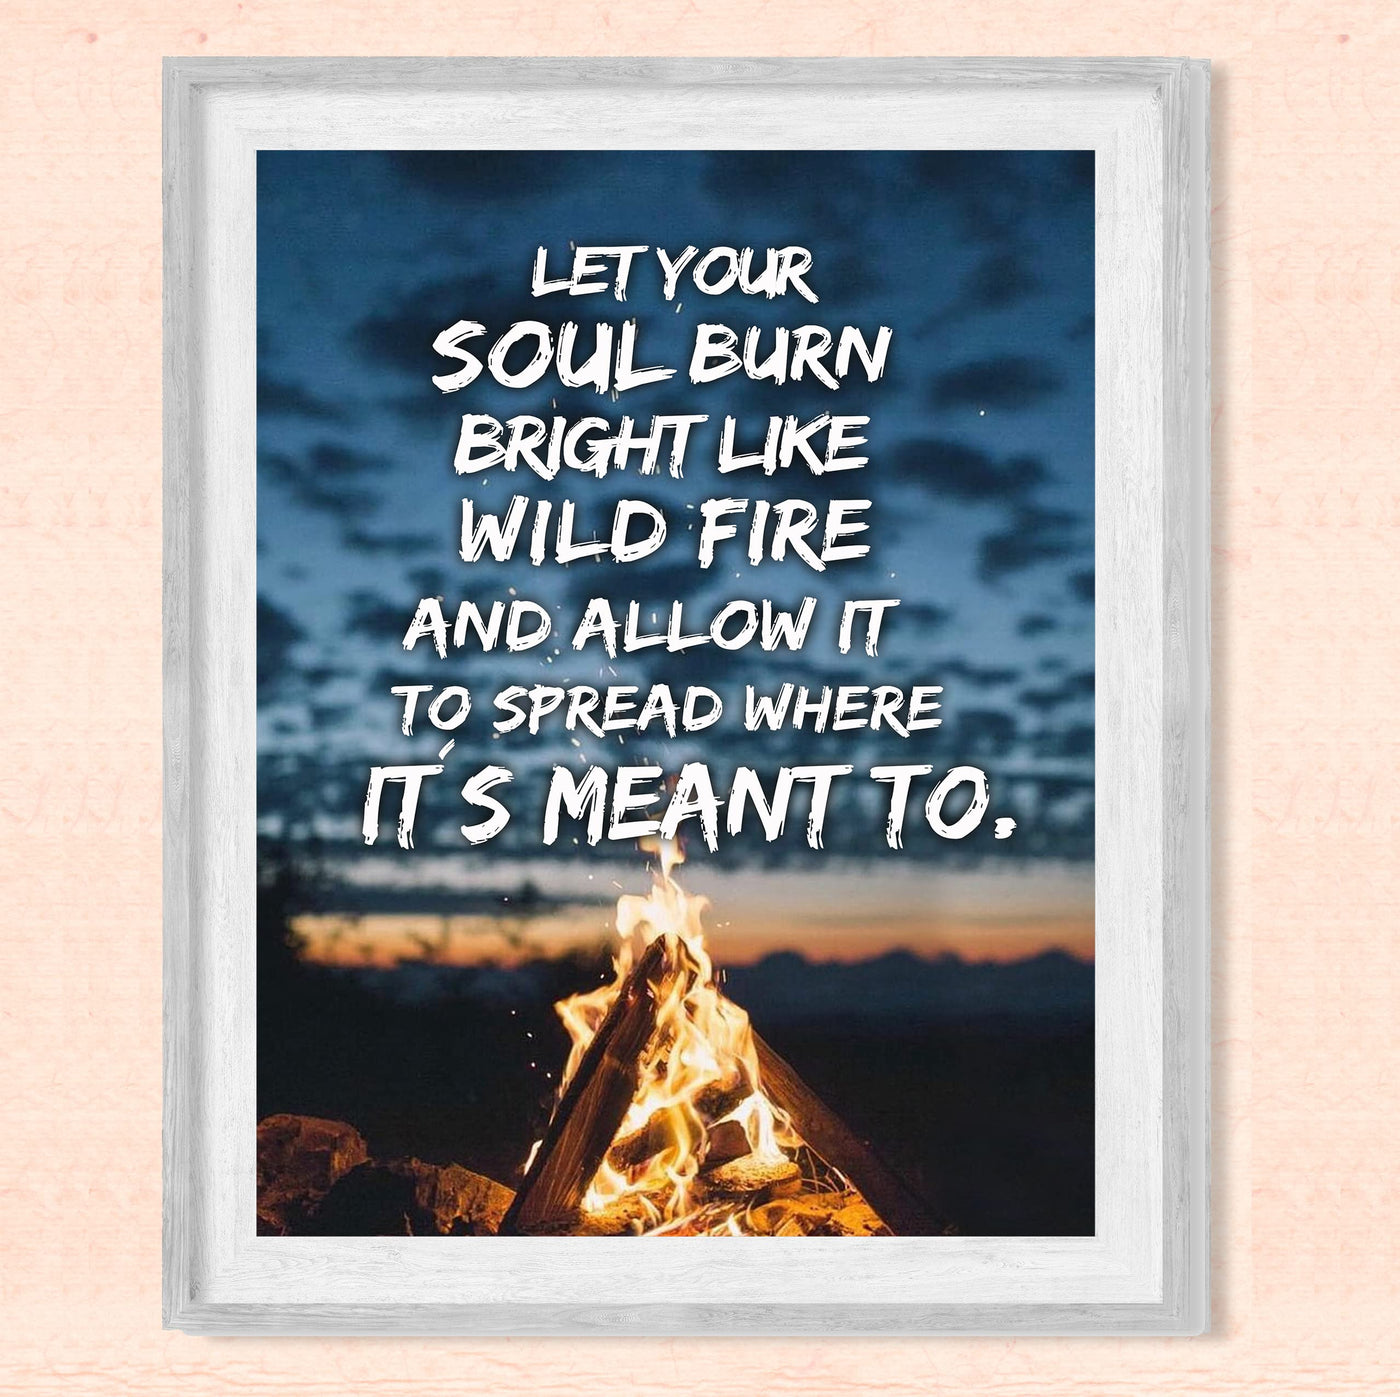 Let Your Soul Burn Bright Like Wild Fire Motivational Quotes Wall Art Sign -8 x 10" Night Sky Bonfire Picture Print-Ready to Frame. Inspirational Home-Office-Lodge-Cabin-Rustic Decor. Great Advice!